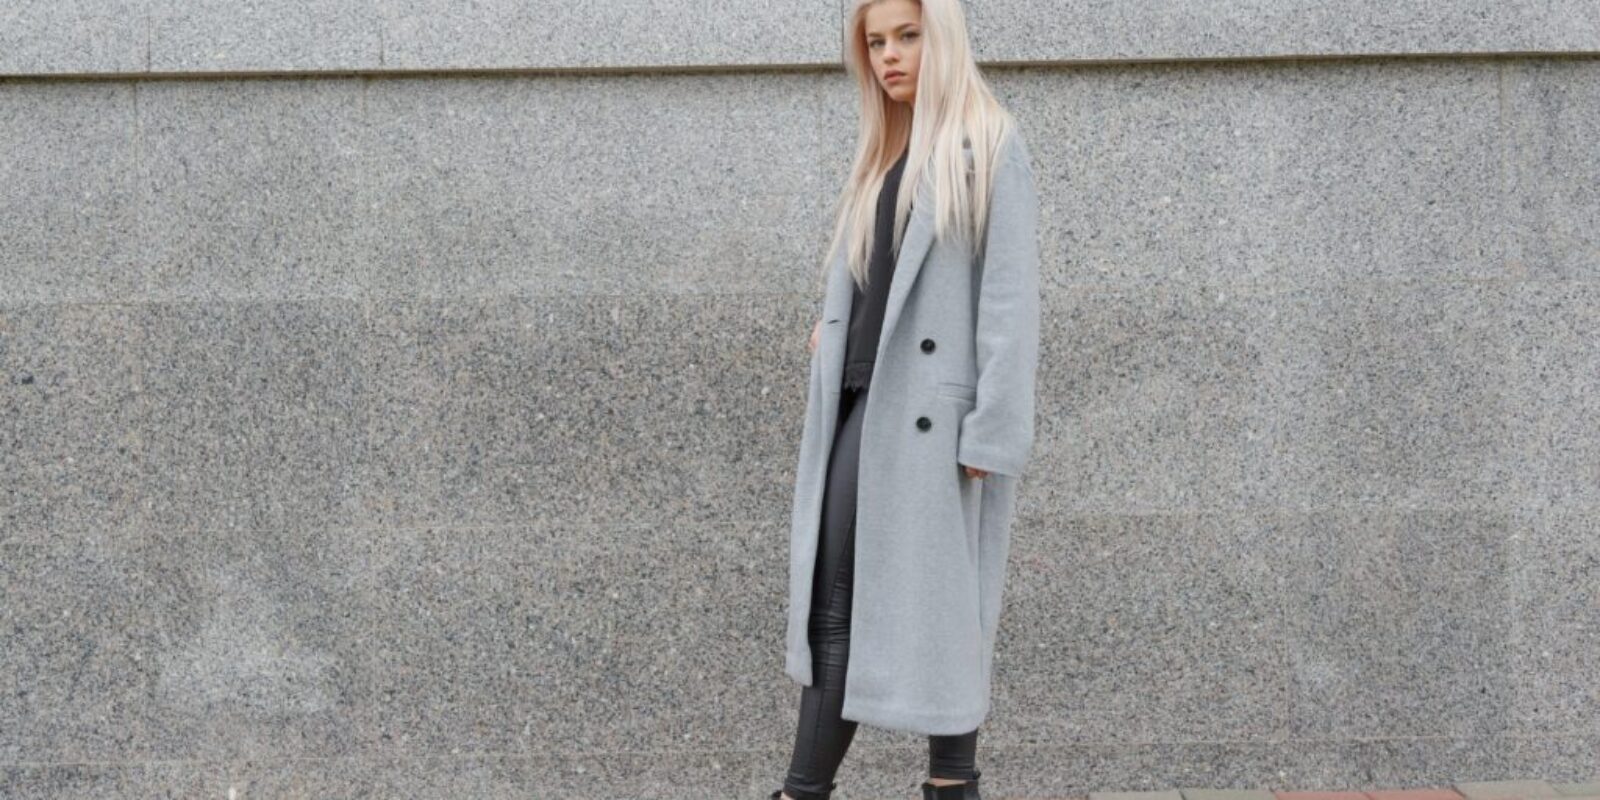 Fashion style young elegant woman in gray fur coat walking at city street.